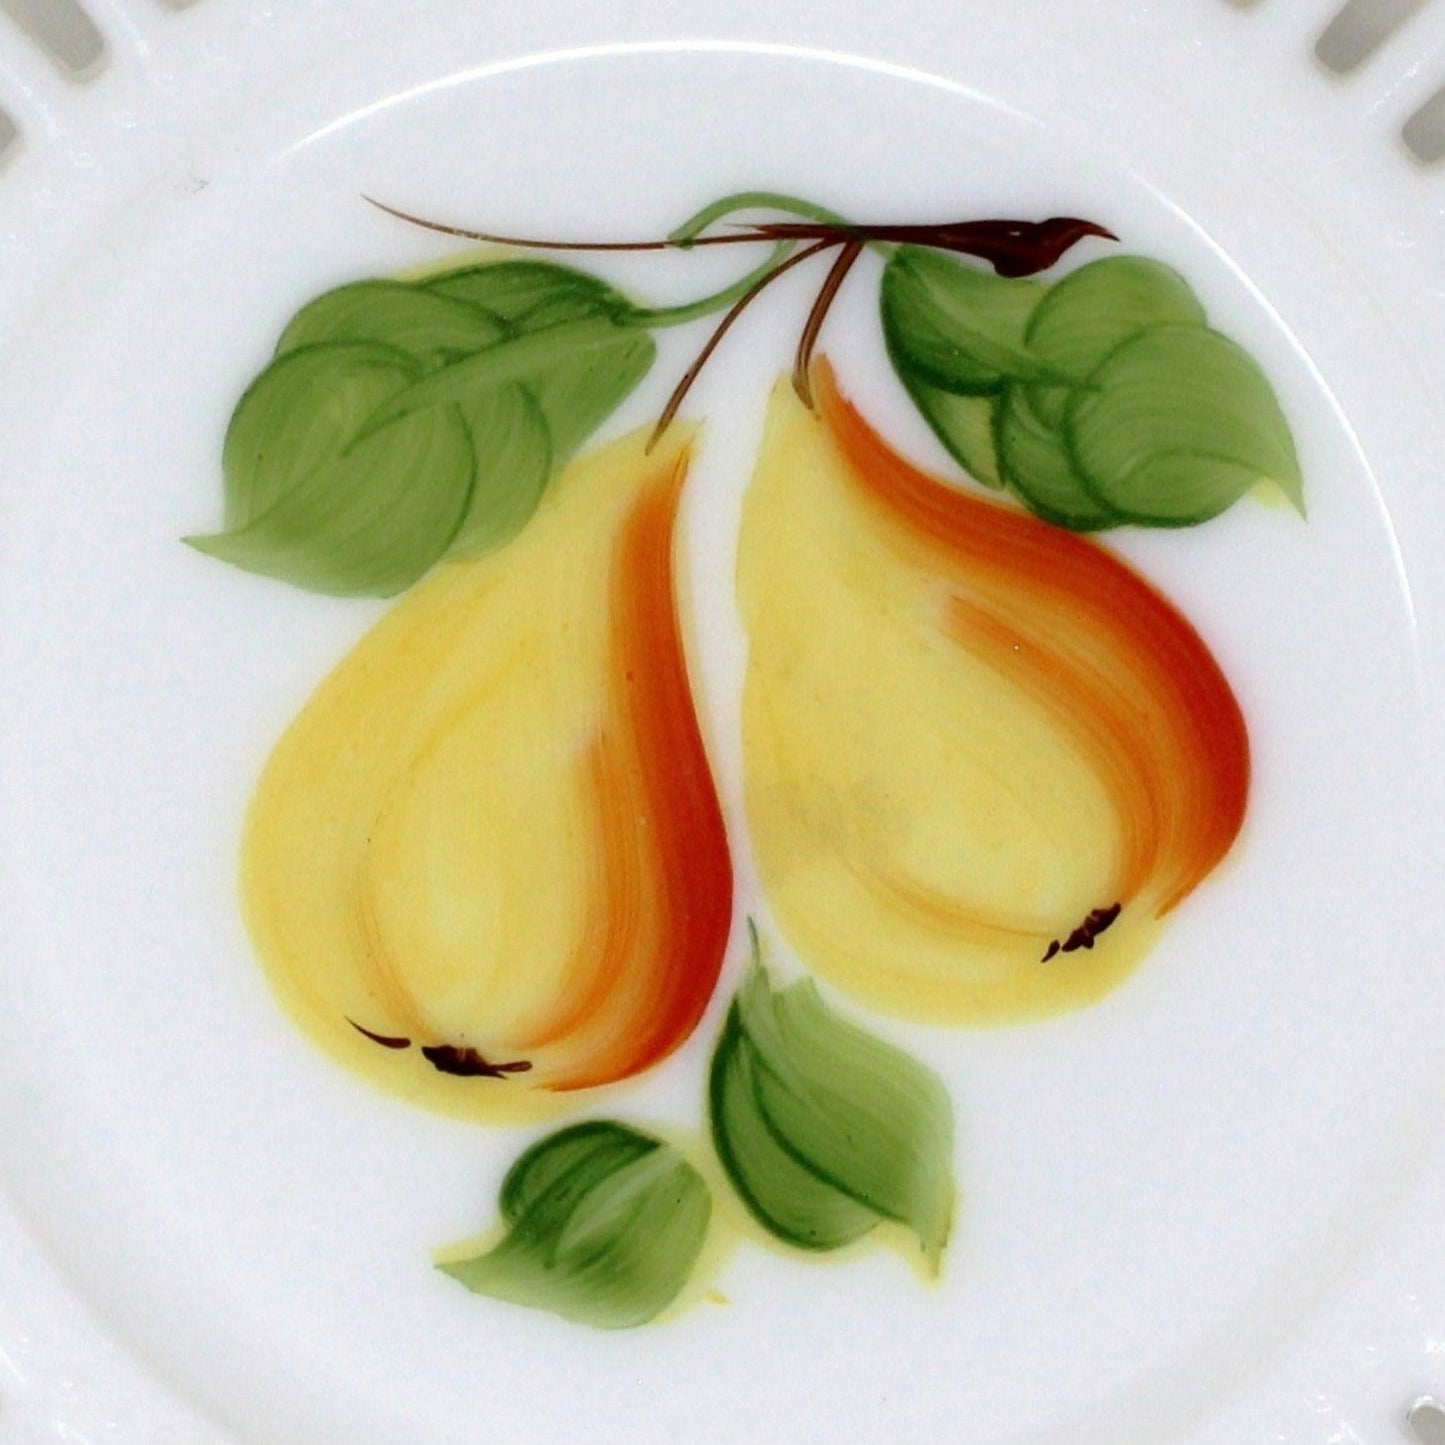 Decorative Plate, Kemple, Hand Painted Pears, Reticulated, Milk Glass, Vintage